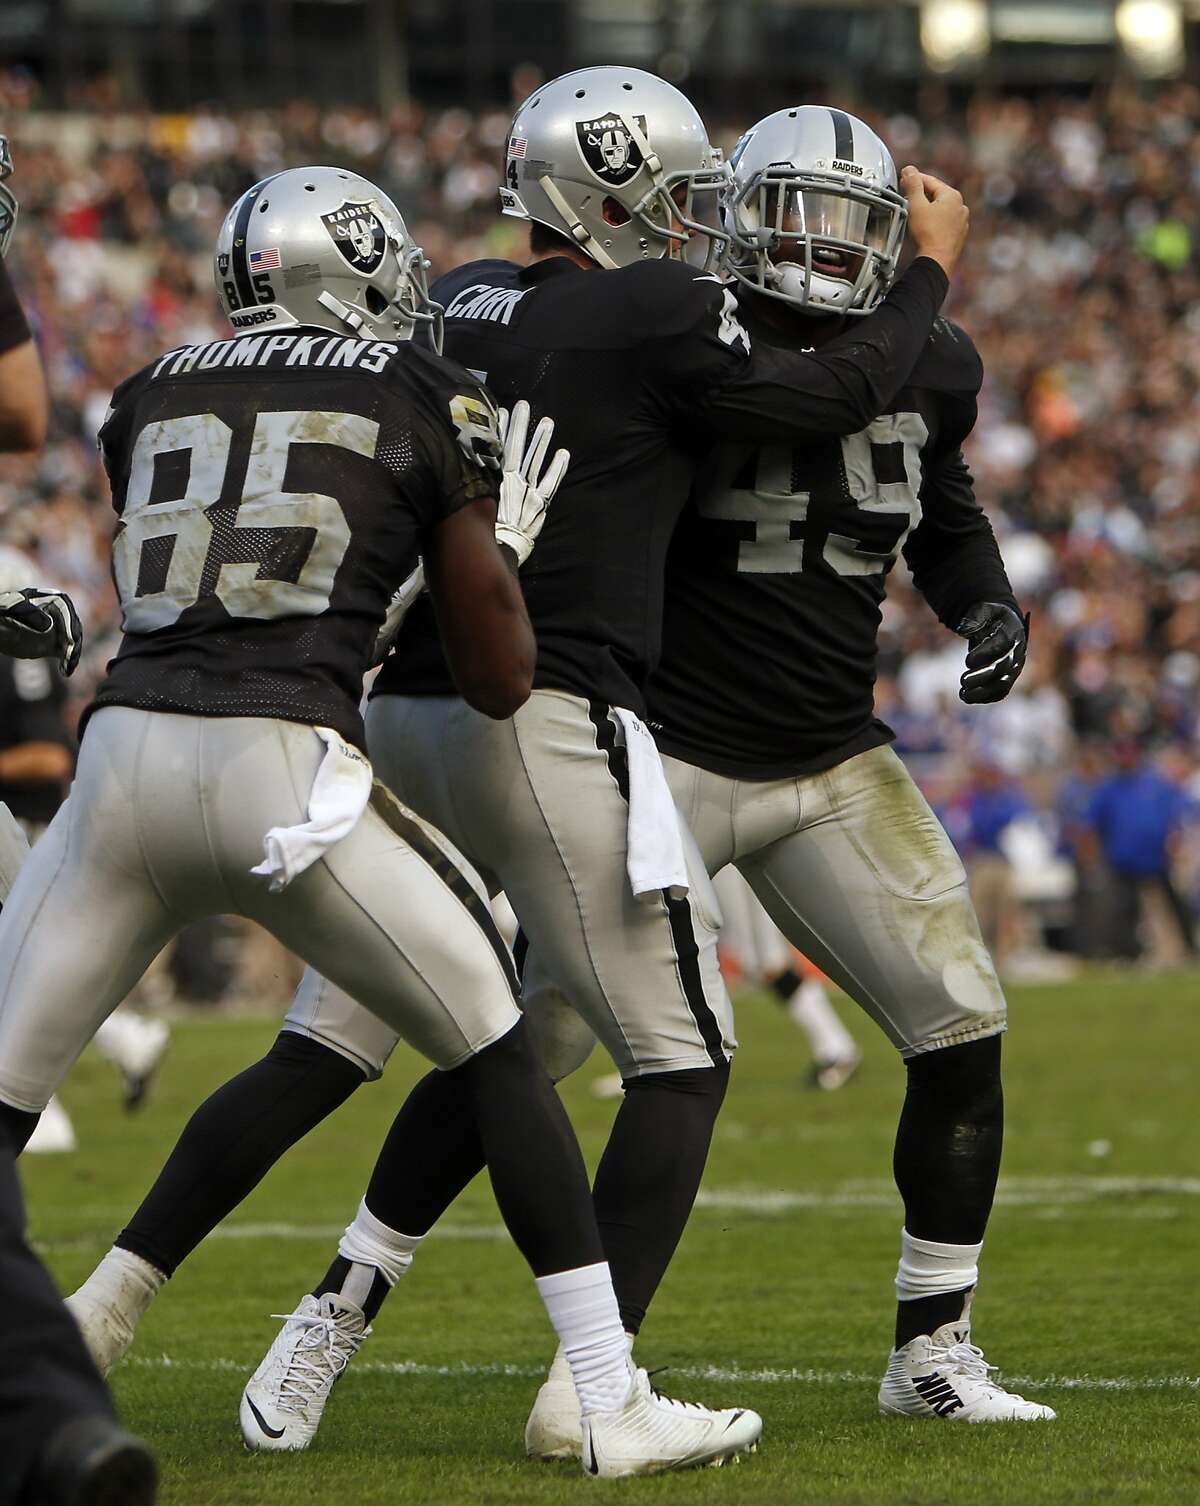 Oakland Raiders' Derek Carr and Kenbrell Thompkins help Jamize Olawale celebrate Olawale's 4th quarter touchdown reception during Raiders' 26-24 win over the Buffalo Bills during NFL game at O.co Coliseum in Oakland, Calif., on Sunday, December 21, 2014.